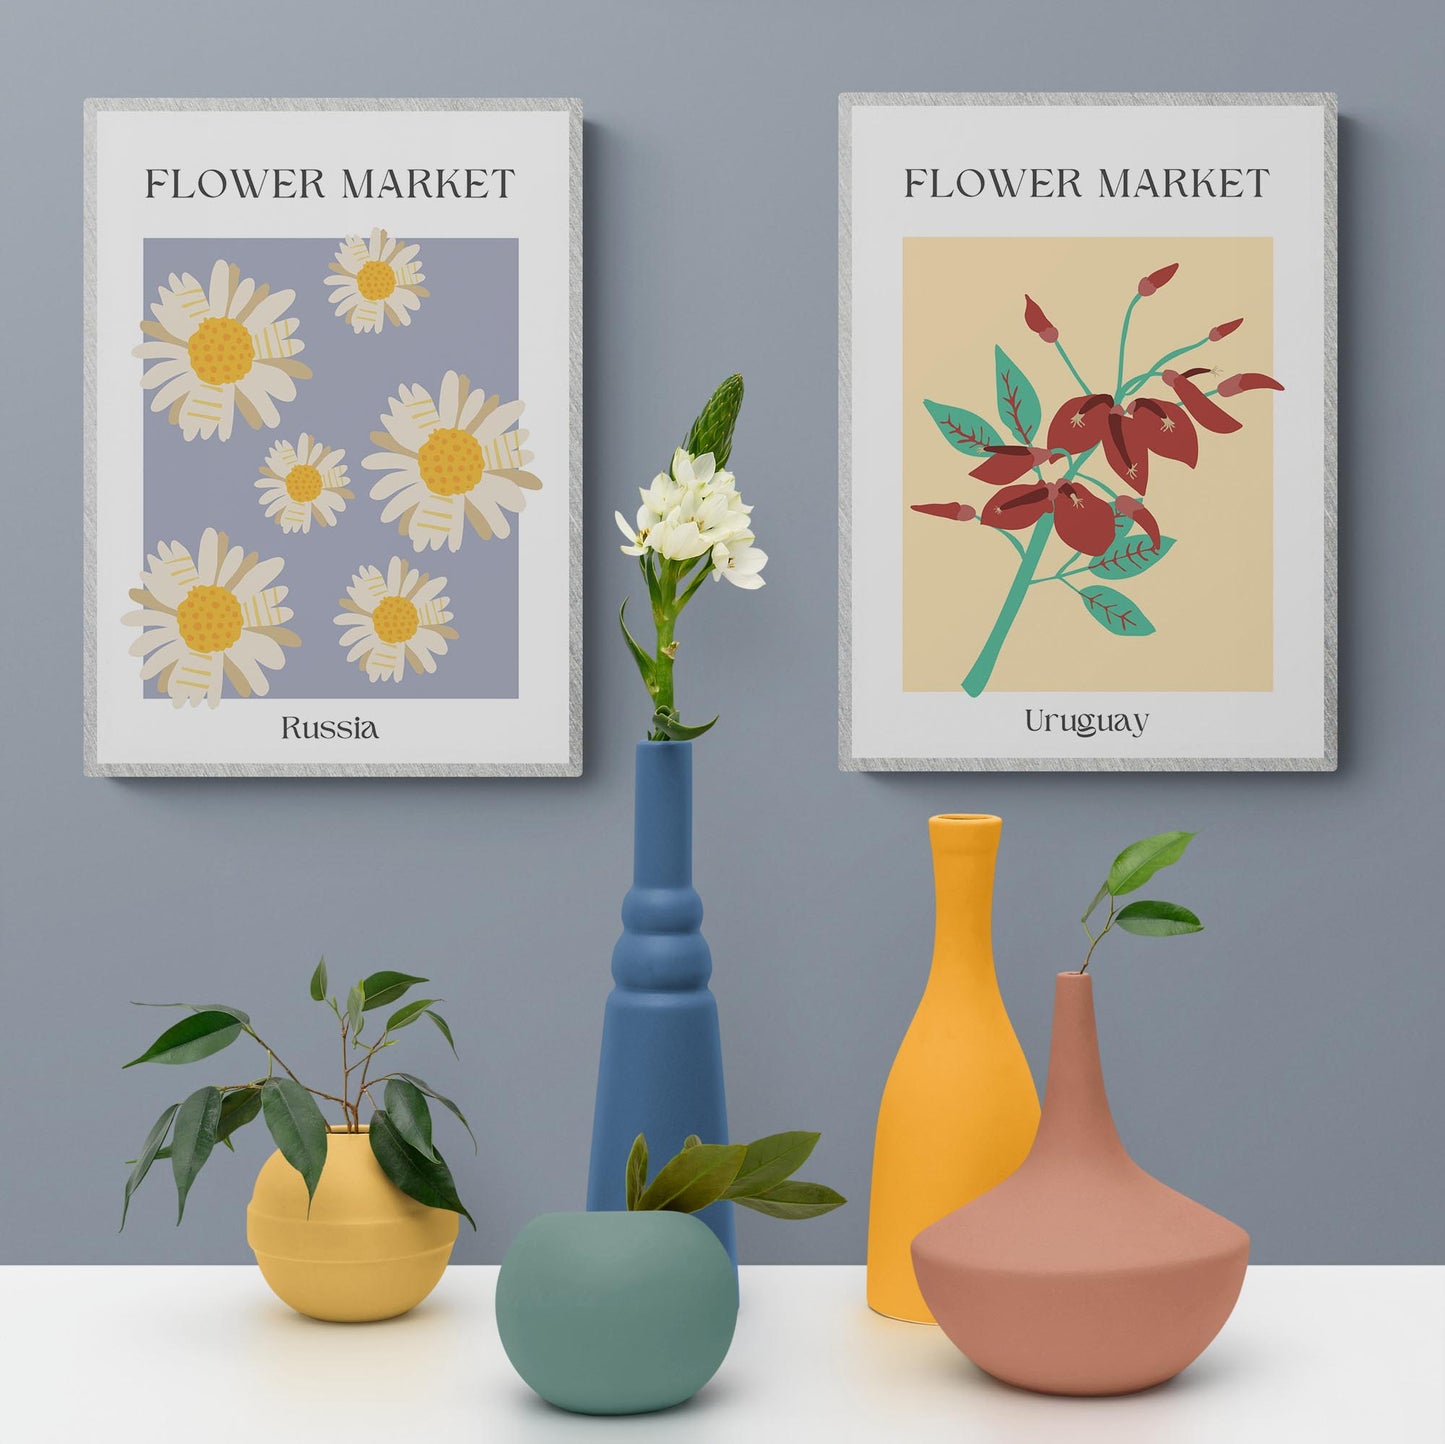 Discover the vibrant beauty and color of the Spanish Flower Market with this print. Featuring floral shapes and forms, this poster is the perfect piece of art to bring a splash of color, texture, and design to your home. Our collection includes gallery wall inspiration and Matisse Art prints for a unique, Danish pastel room decor look. Experience the history and beauty of the Flower Market with this poster.